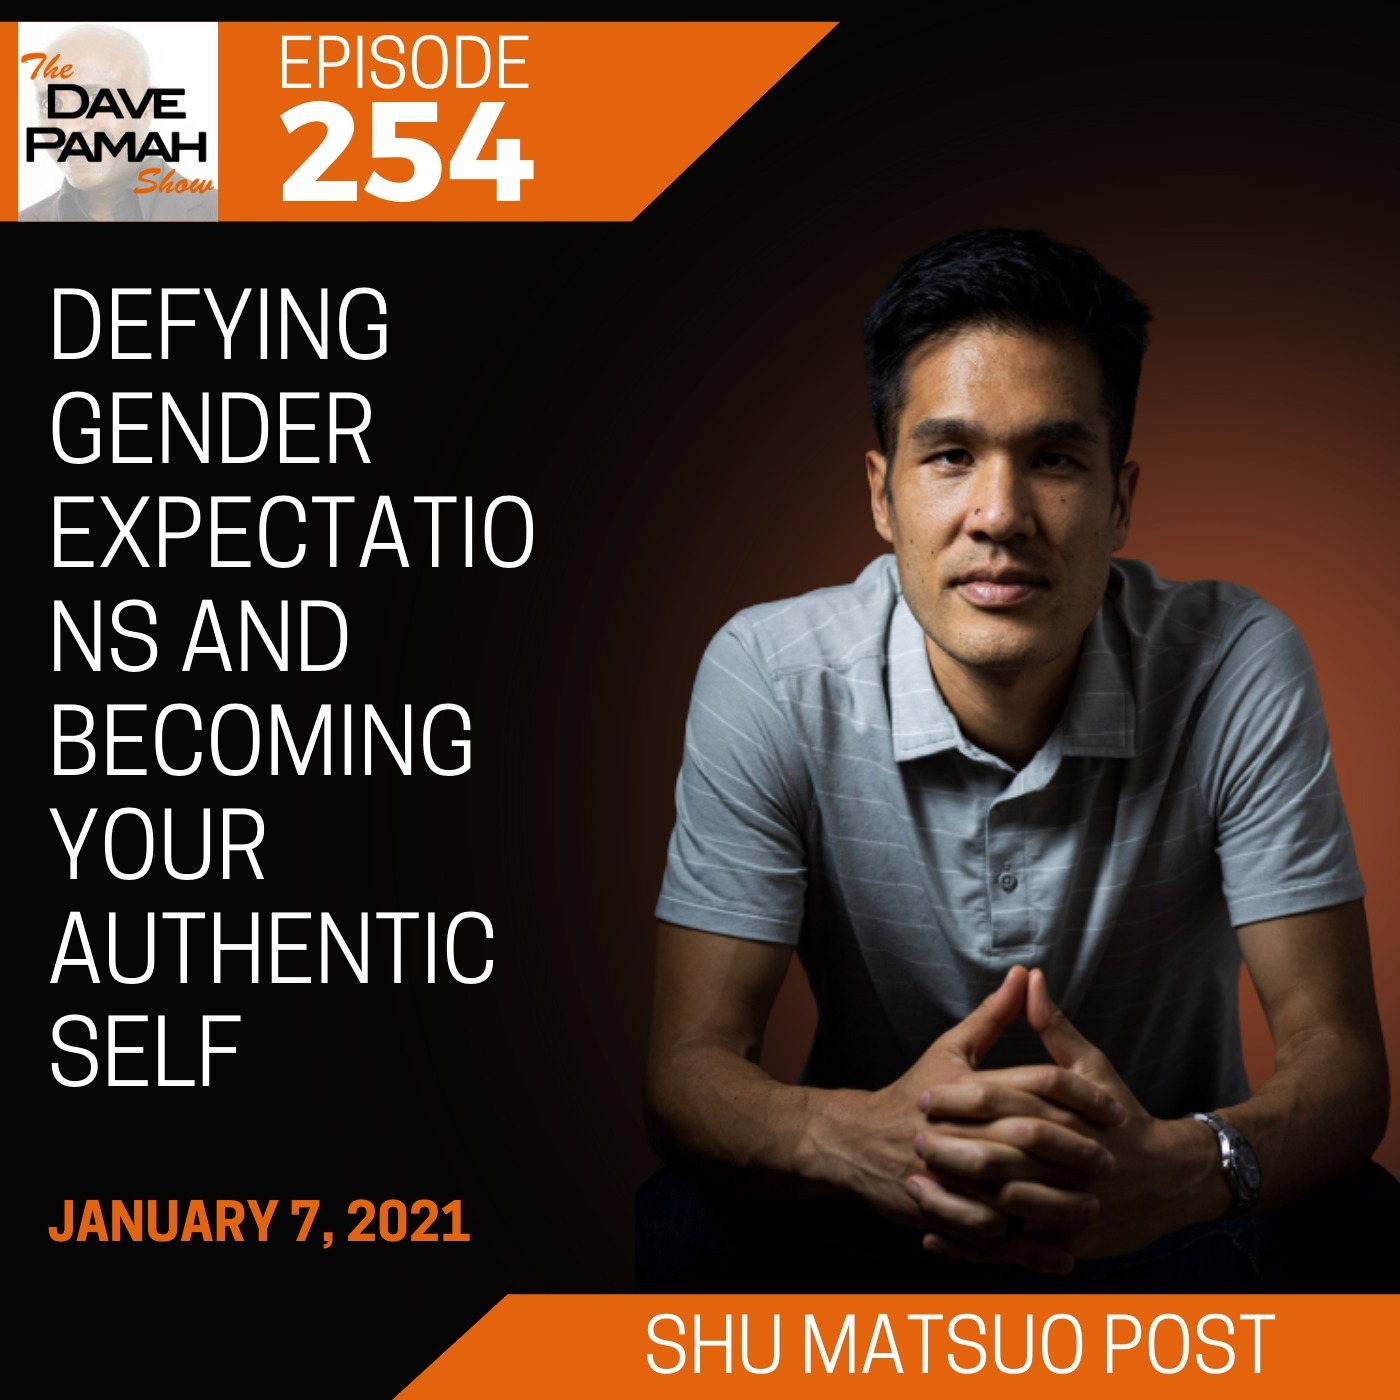 Defying gender expectations and becoming your authentic self with Shu Matsuo Post Image